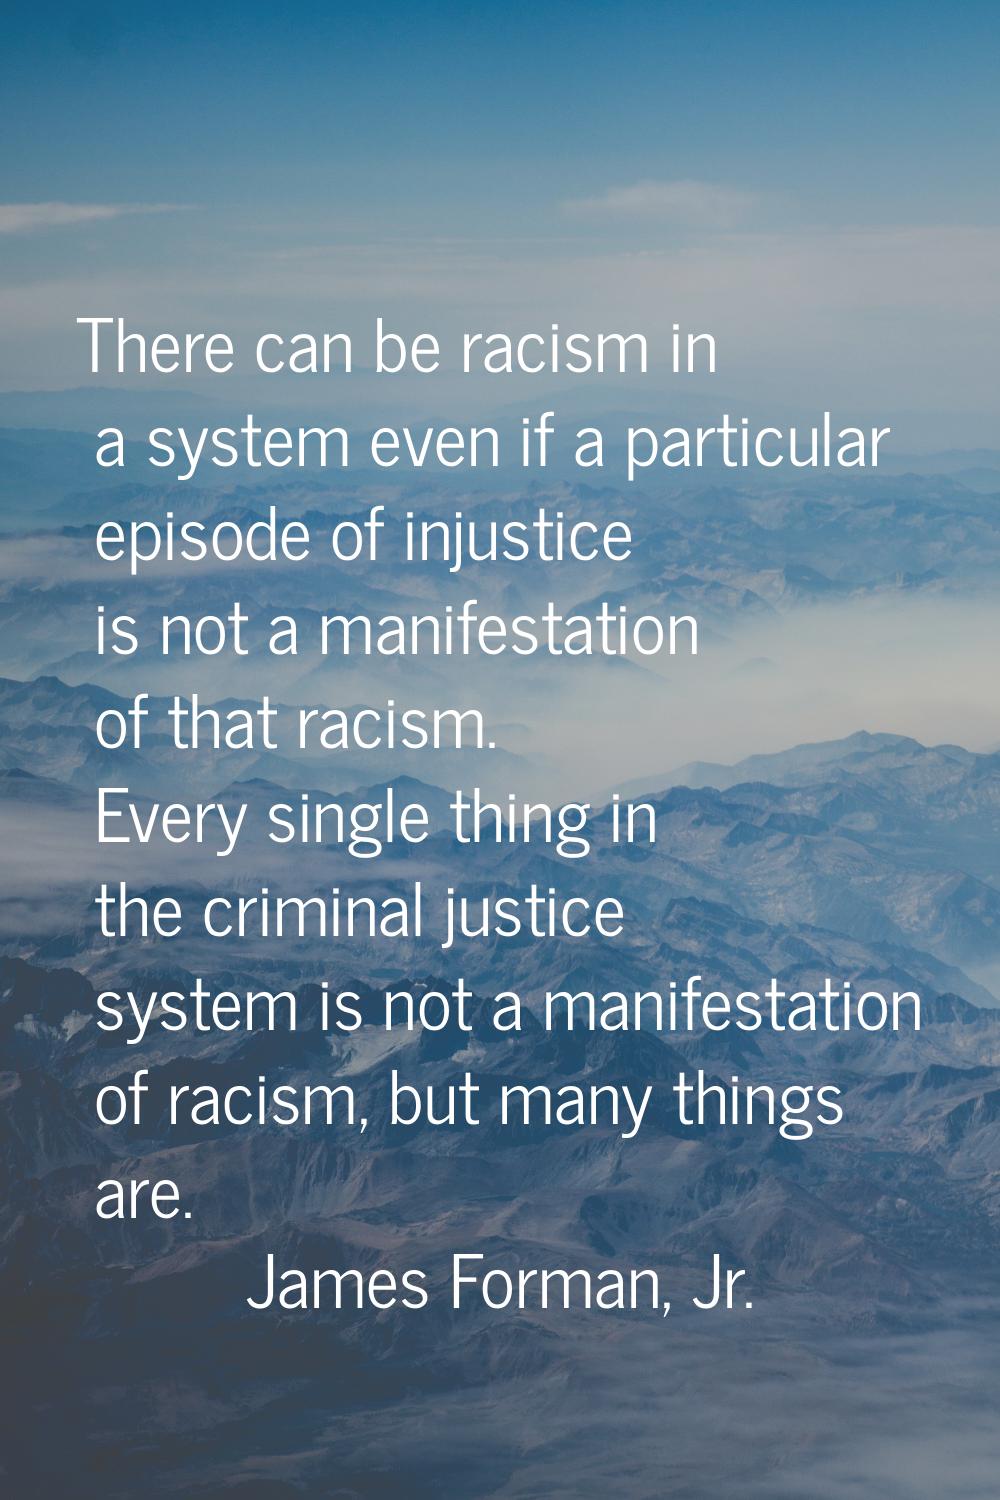 There can be racism in a system even if a particular episode of injustice is not a manifestation of